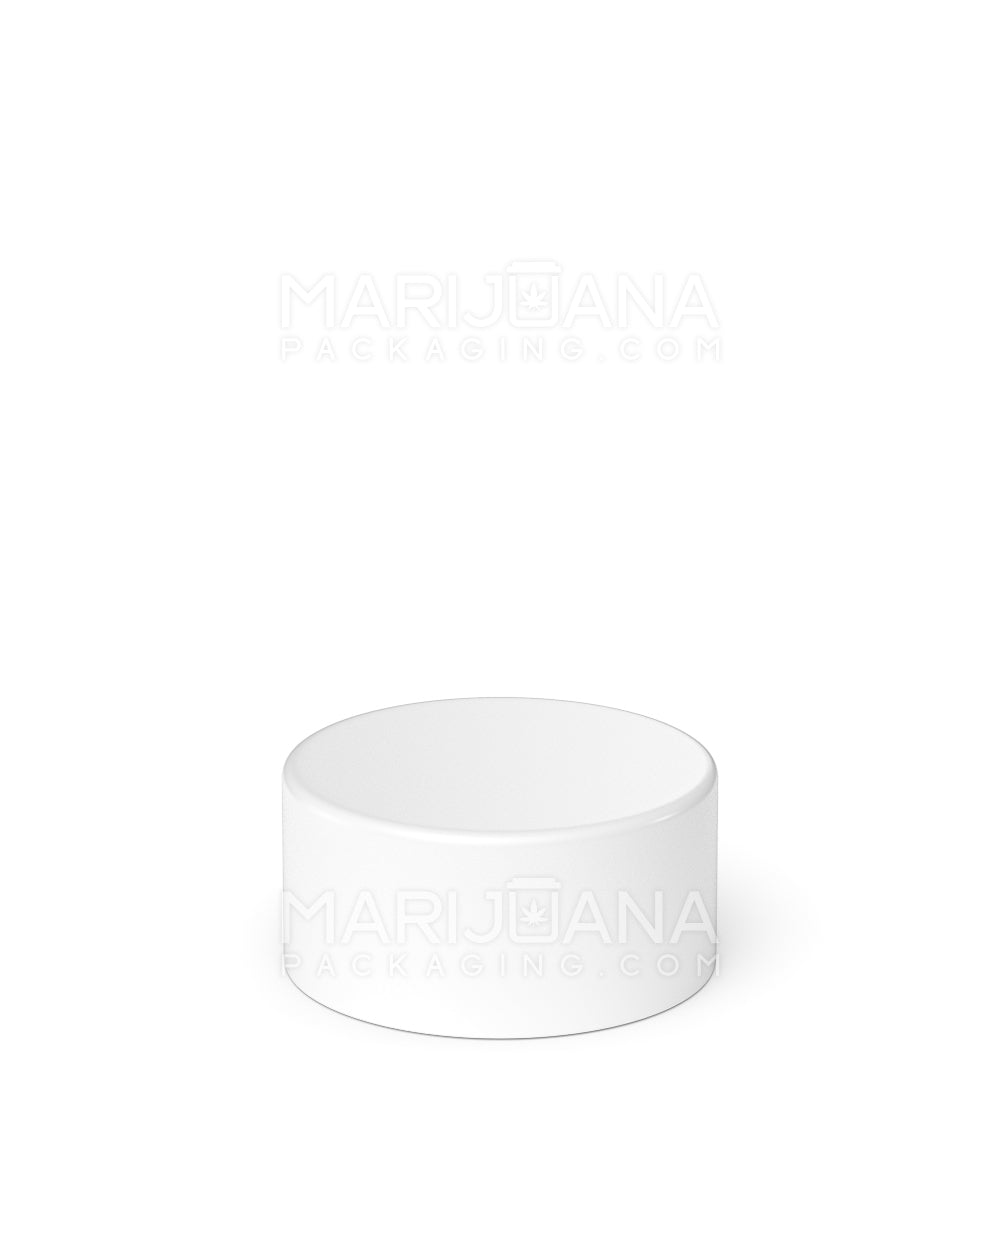 Child Resistant | Smooth Push Down & Turn Plastic Caps w/ Foil Liner | 28mm - Matte White - 504 Count - 3